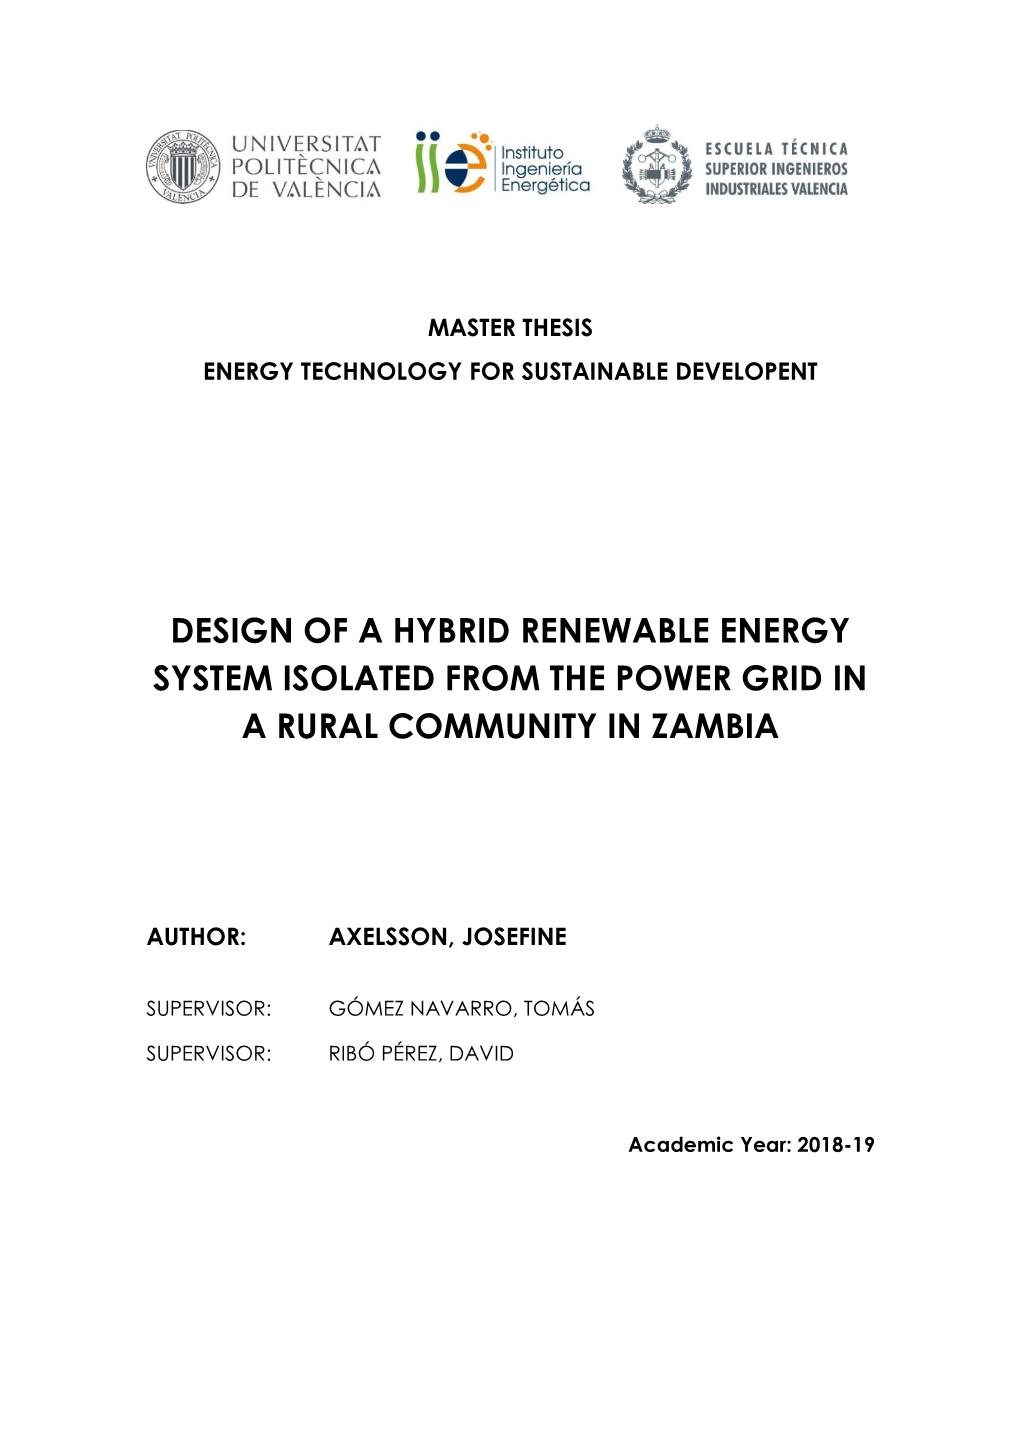 Design of a Hybrid Renewable Energy System Isolated from the Power Grid In